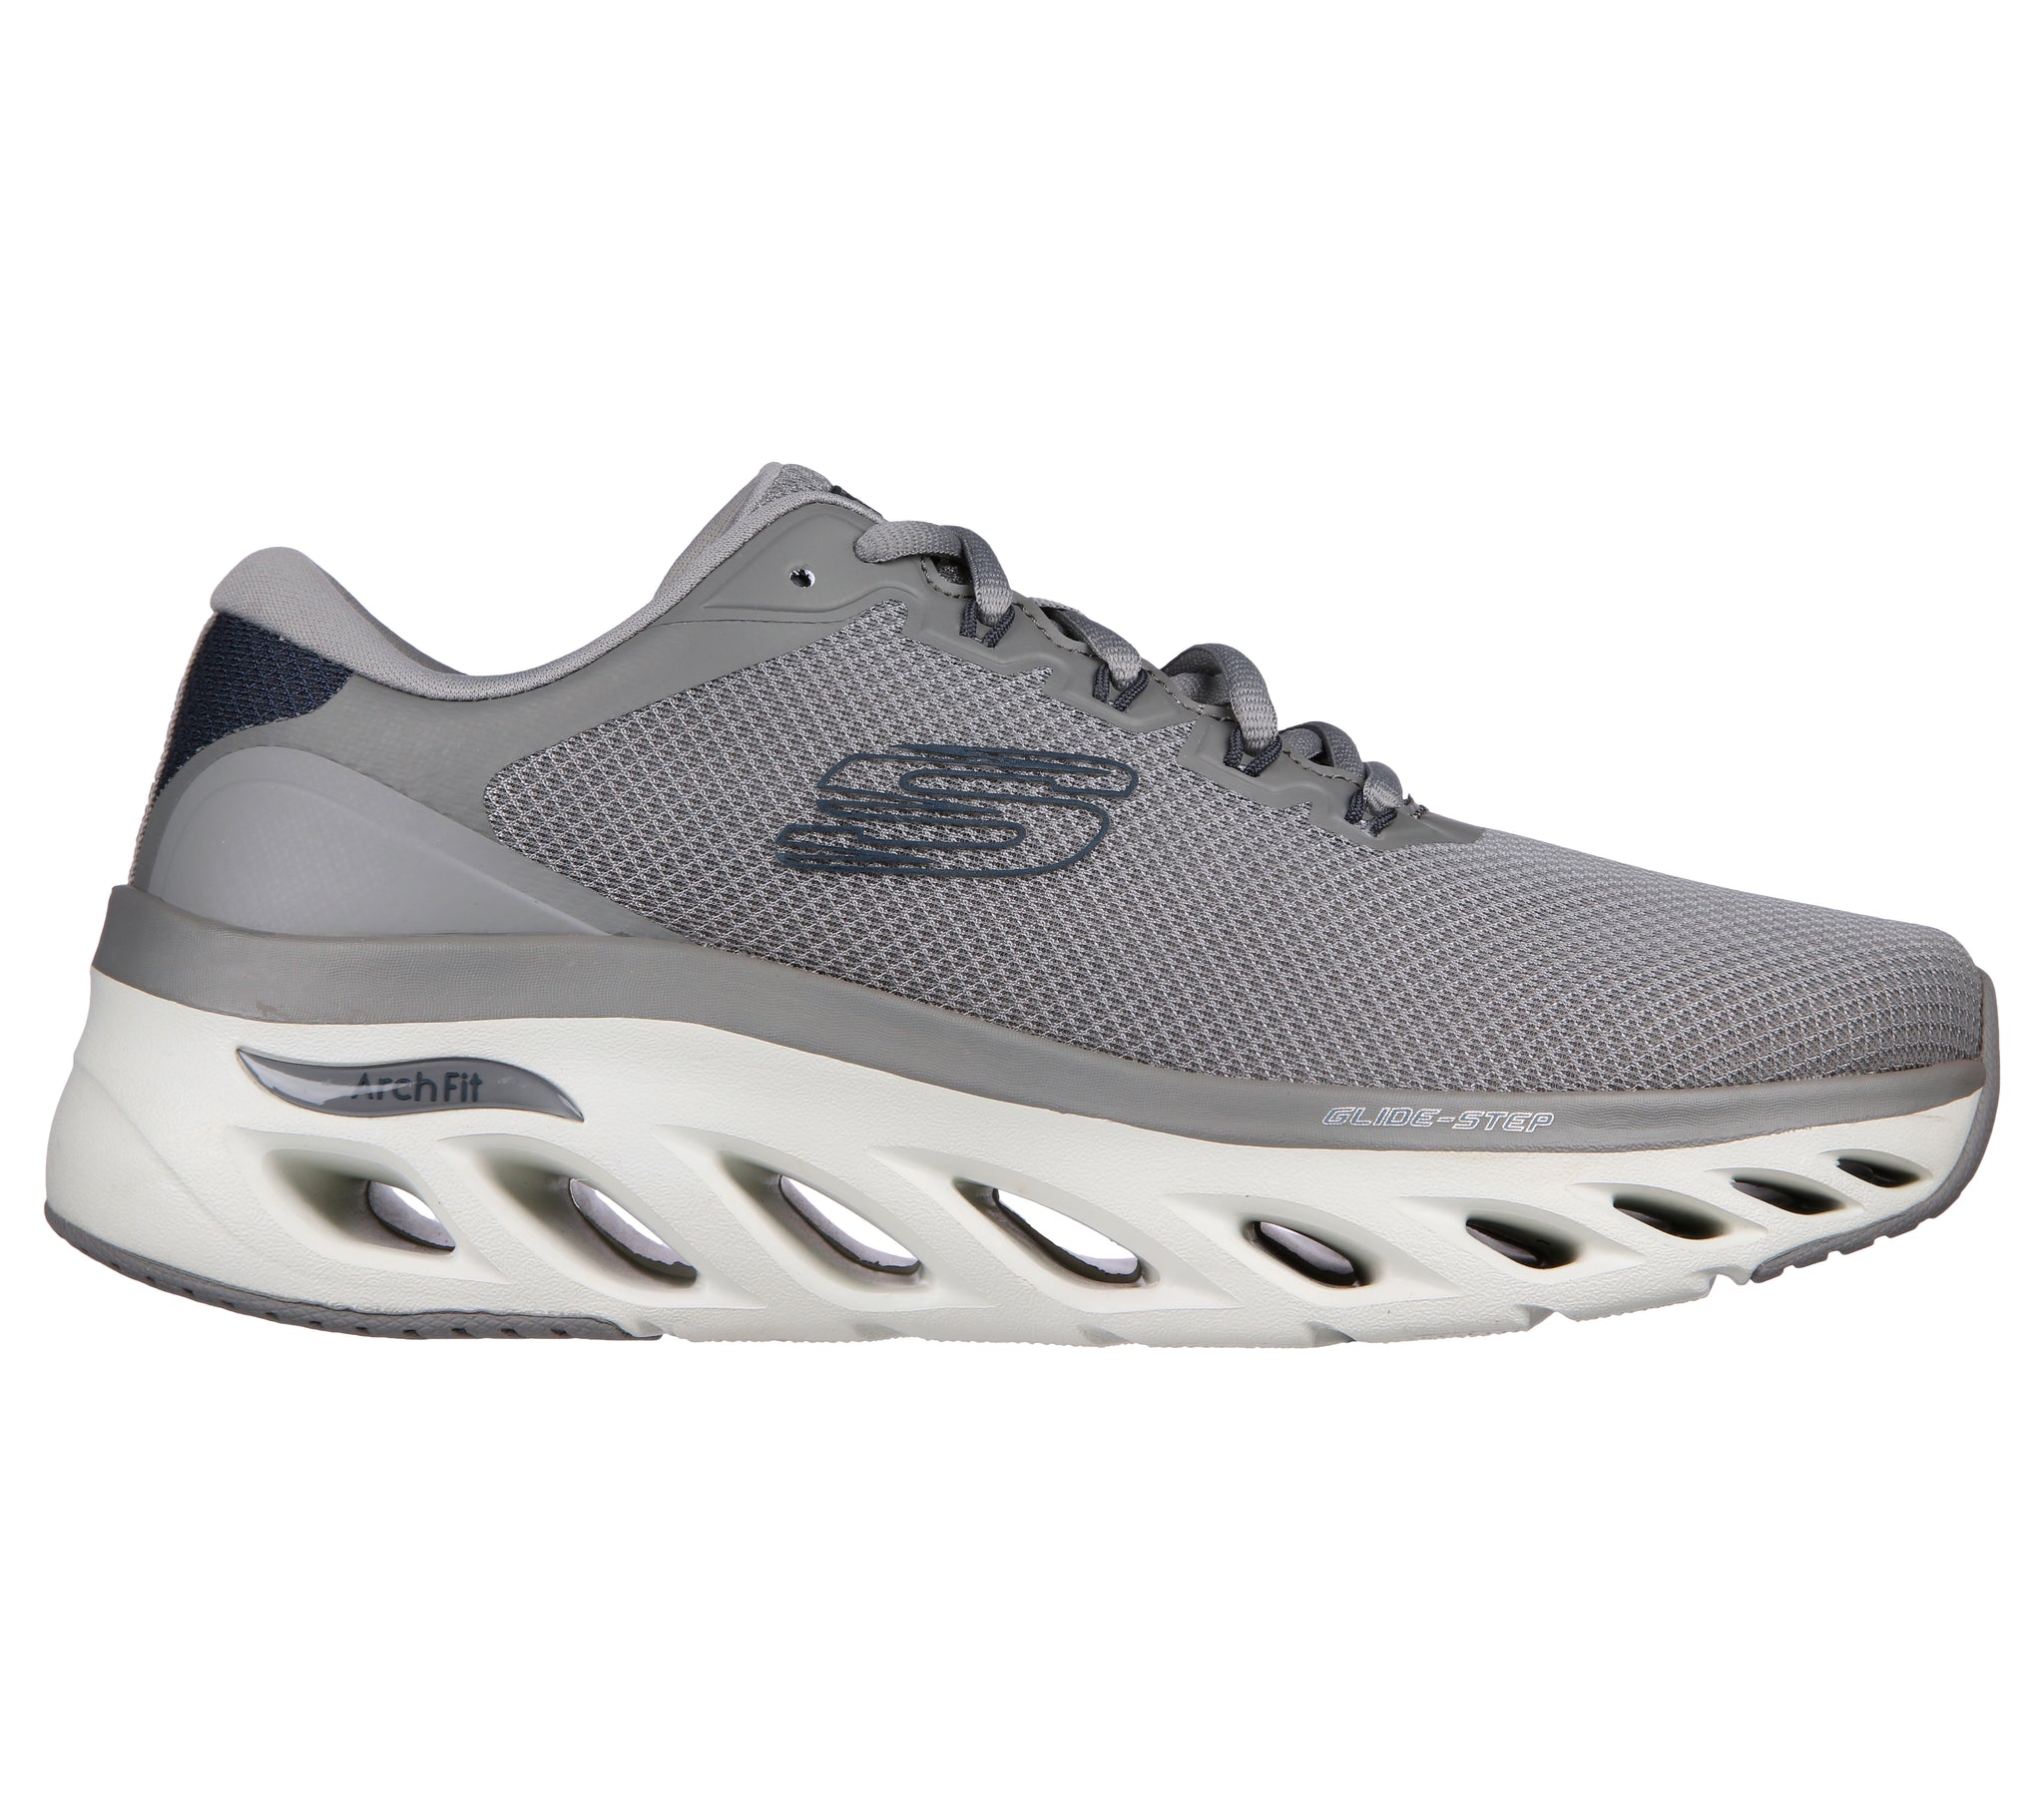 232321 GRY - SKECHERS ARCH FIT GLIDE-STEP - HIGHLIGHTER - Shoess